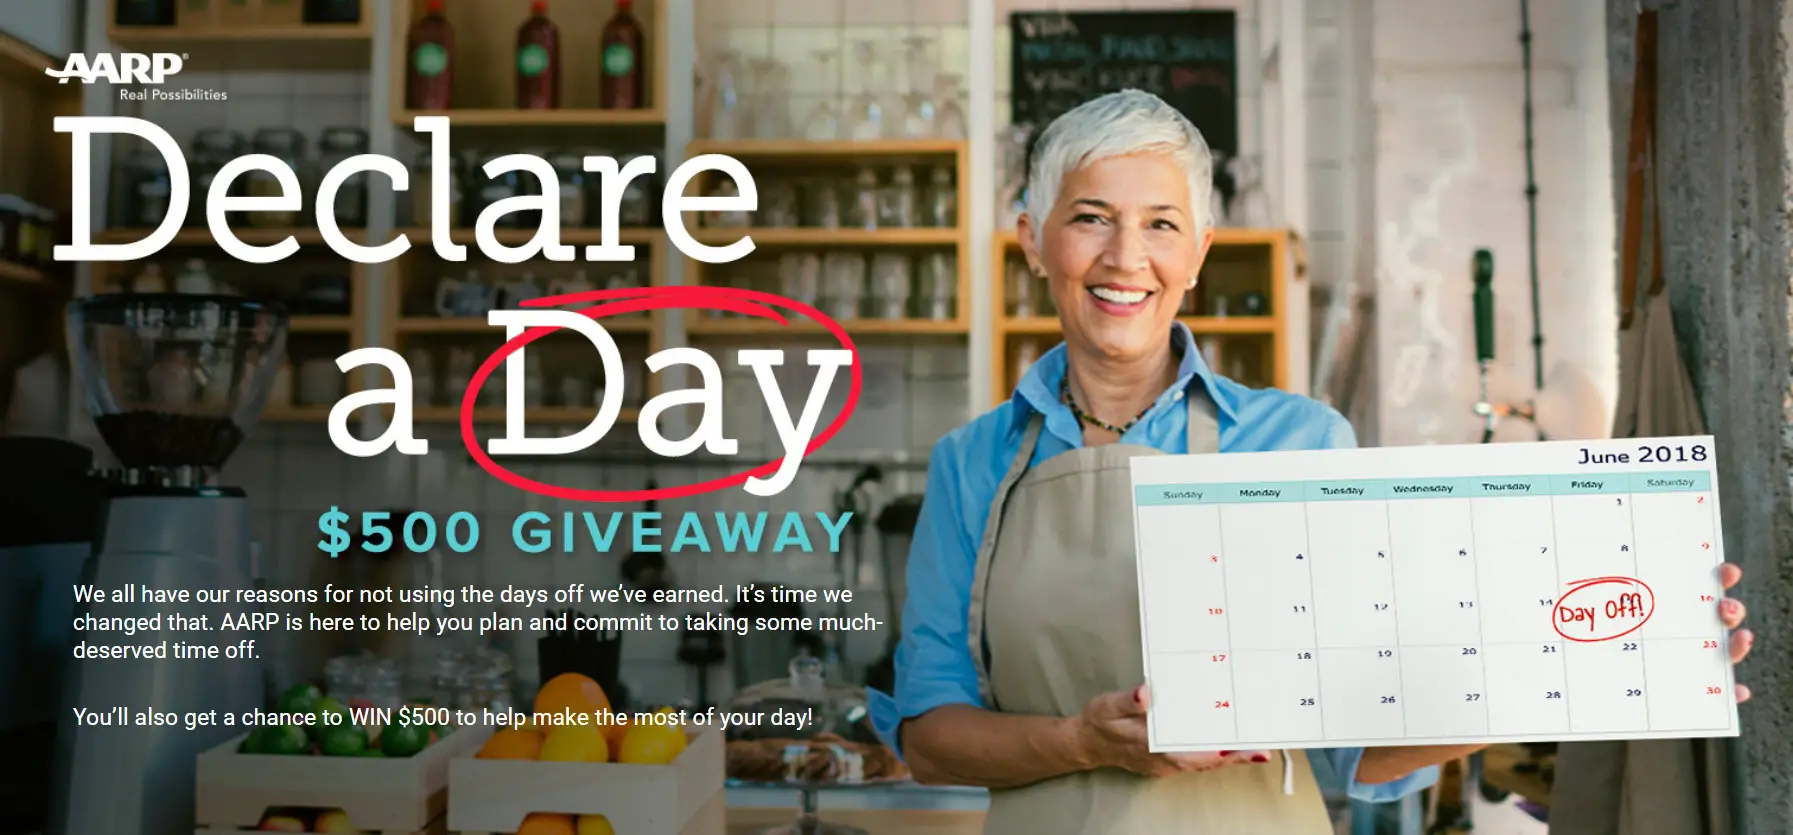 AARP is here to help you plan and commit to taking some much-deserved time off with a chance to WIN $500 to help make the most of your day!